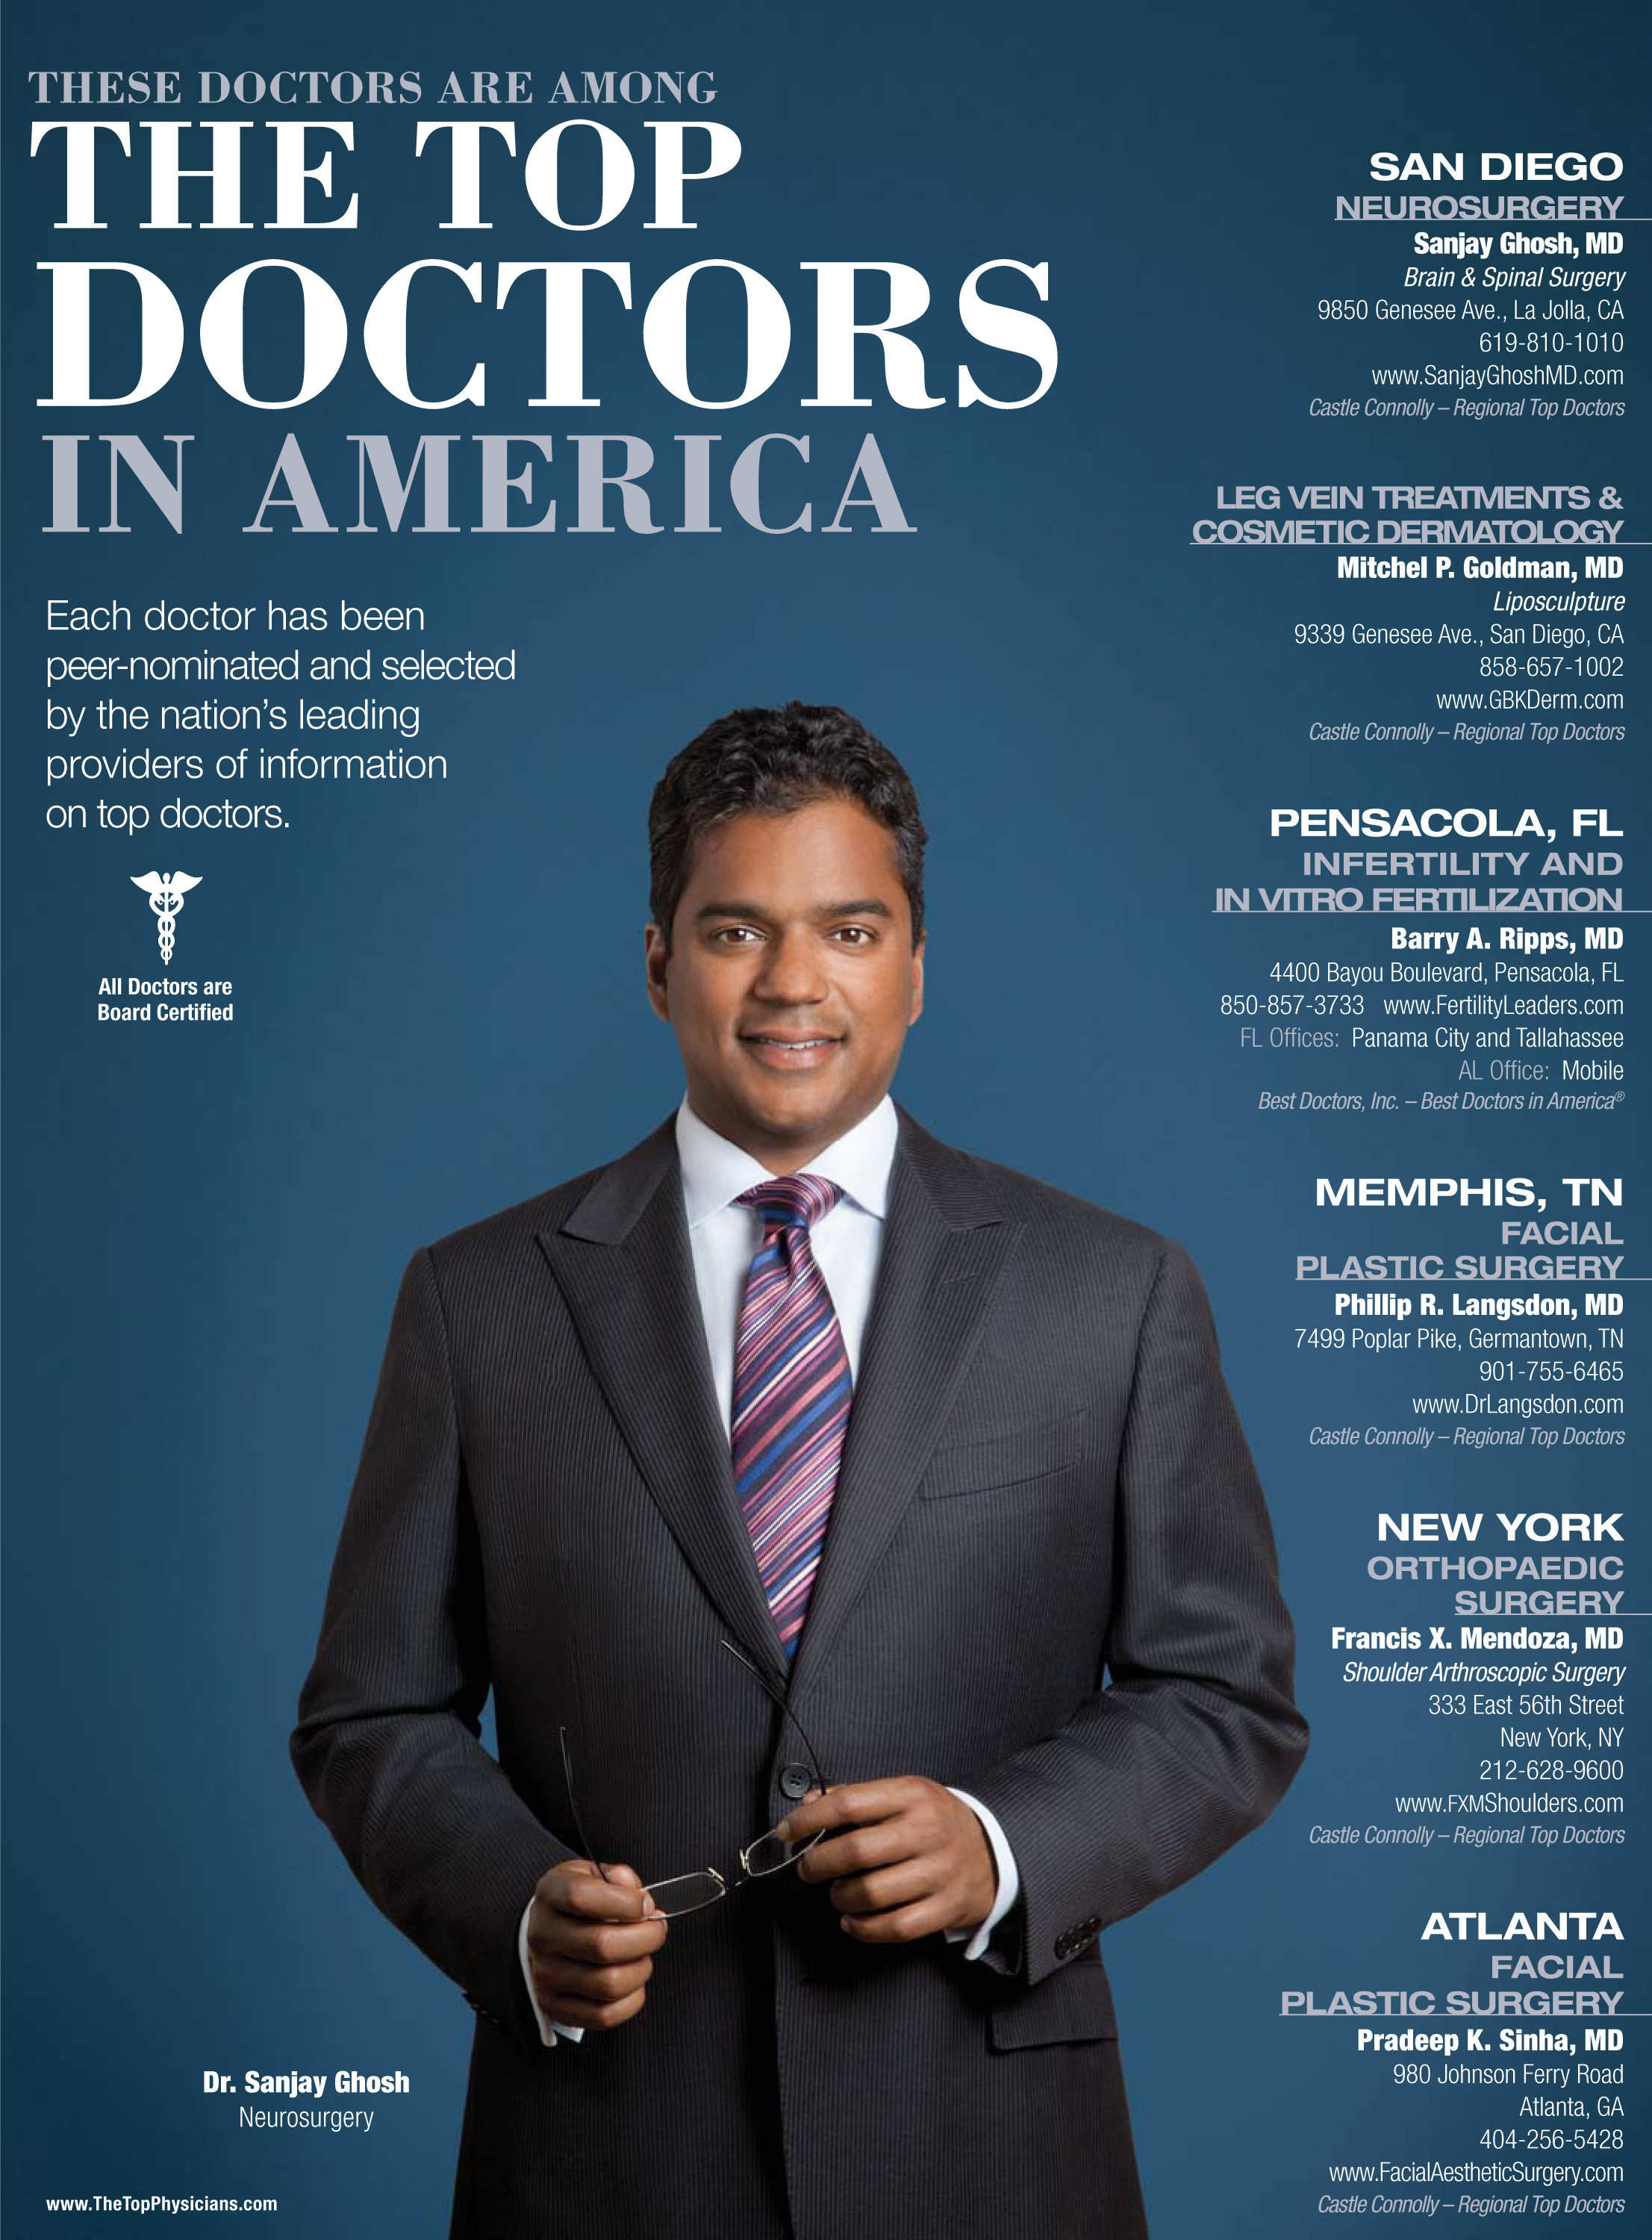 Who are some top neurosurgeons in the United States?